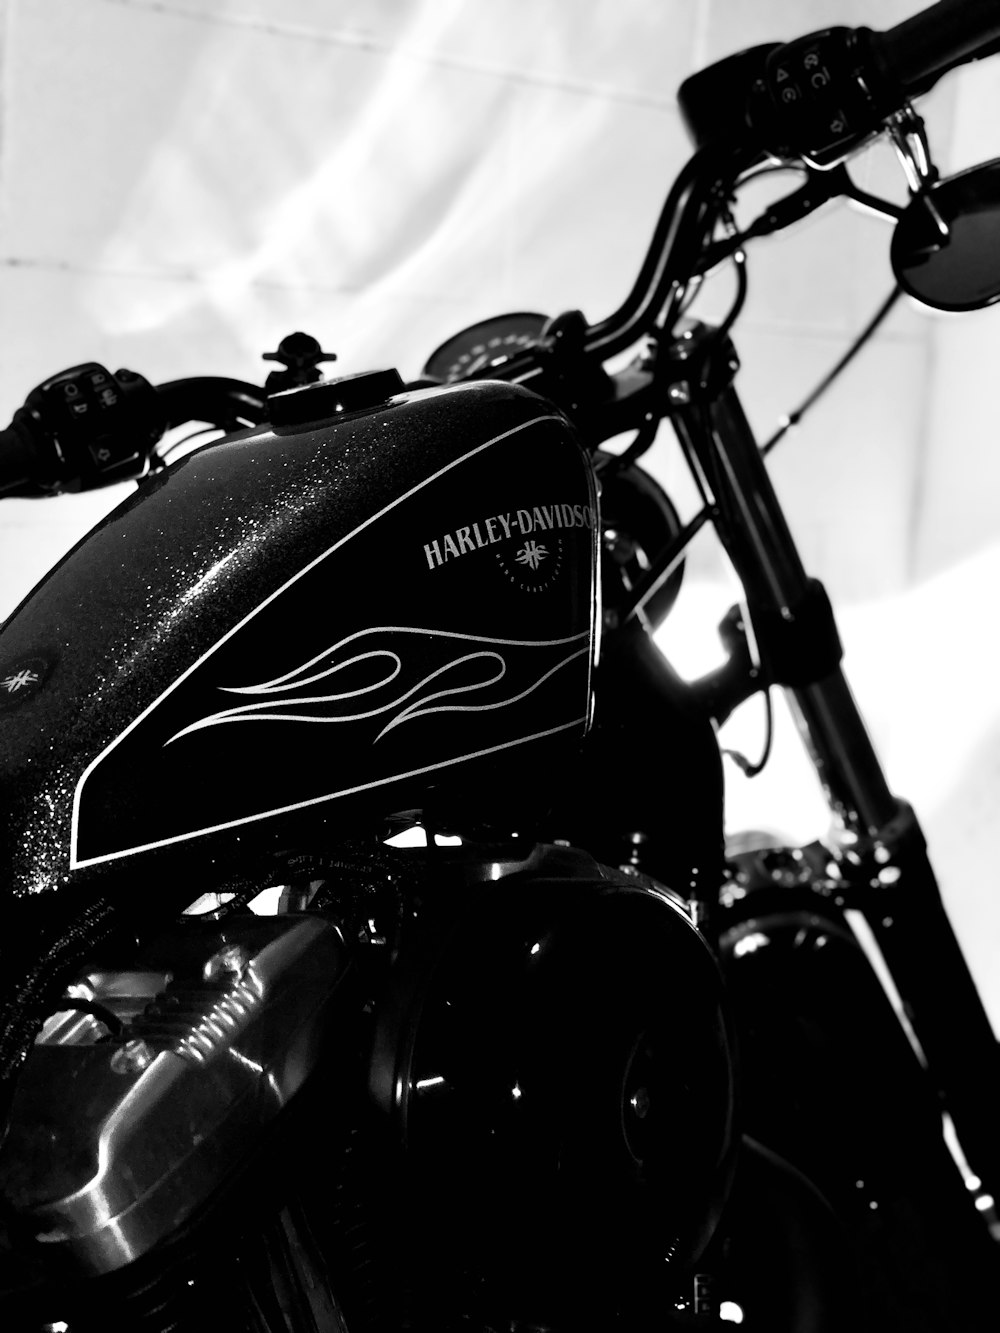 black and gray motorcycle in grayscale photography